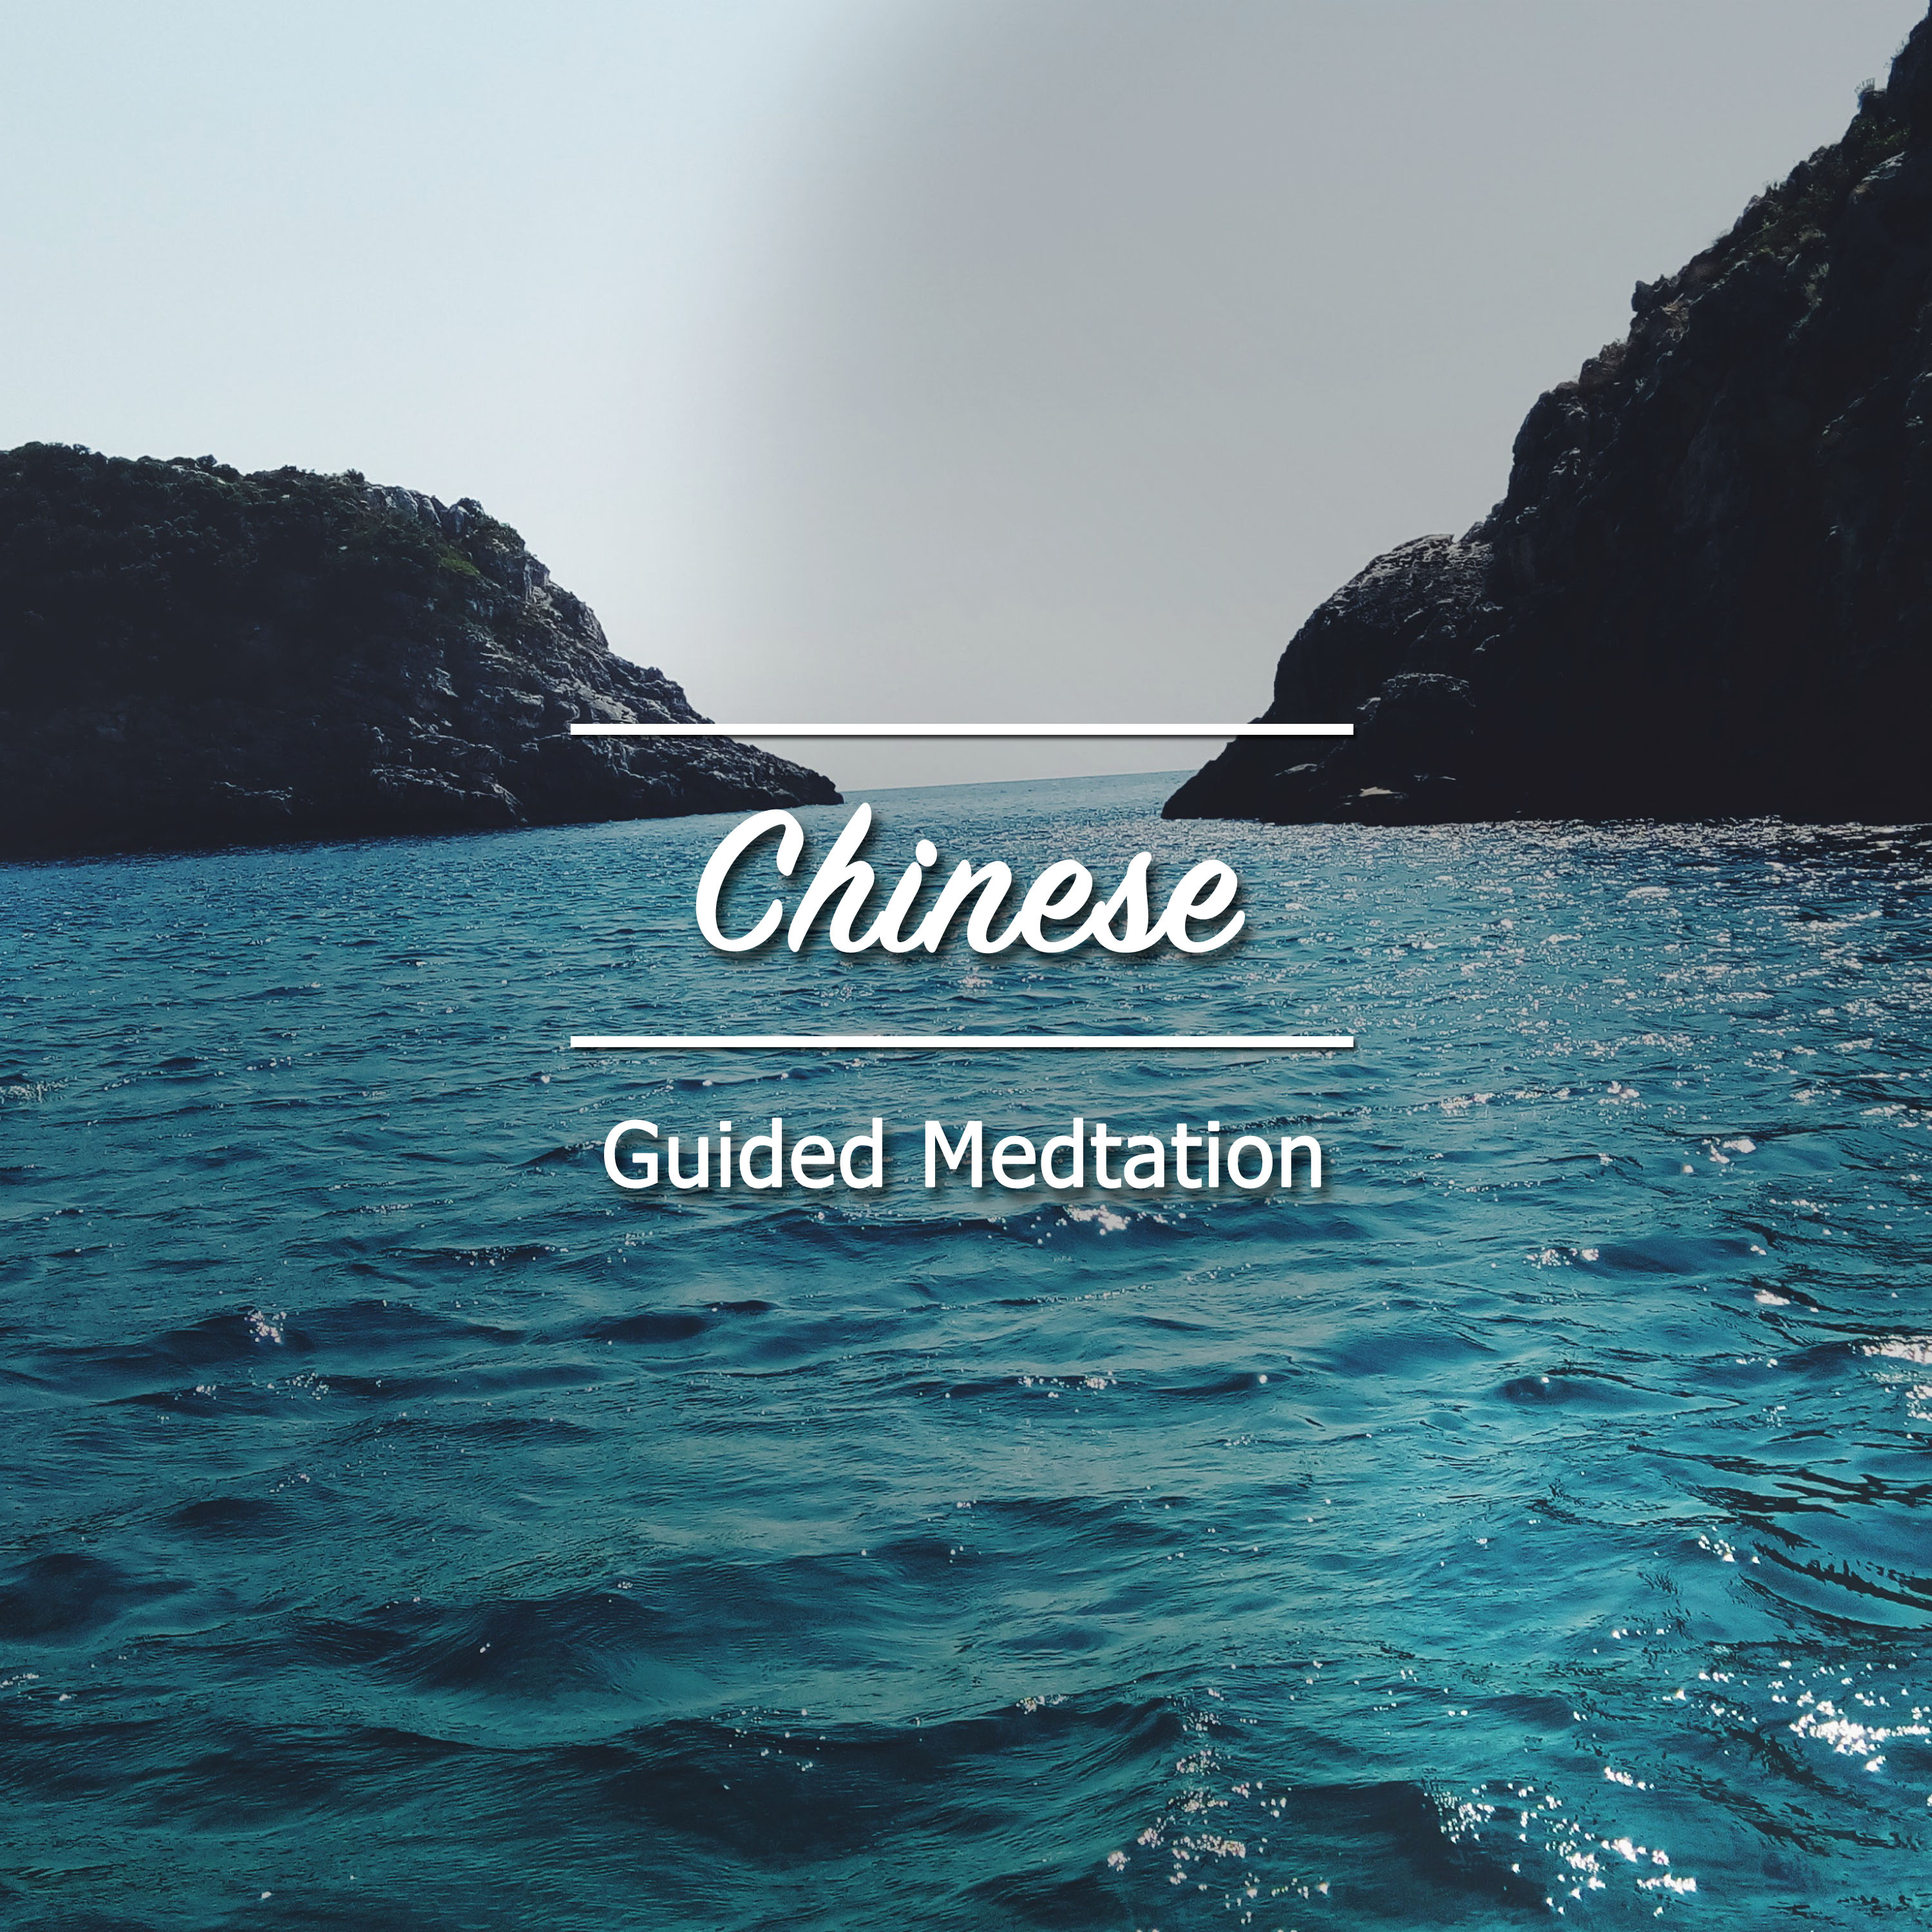 13 Chinese Guided Meditation Sounds